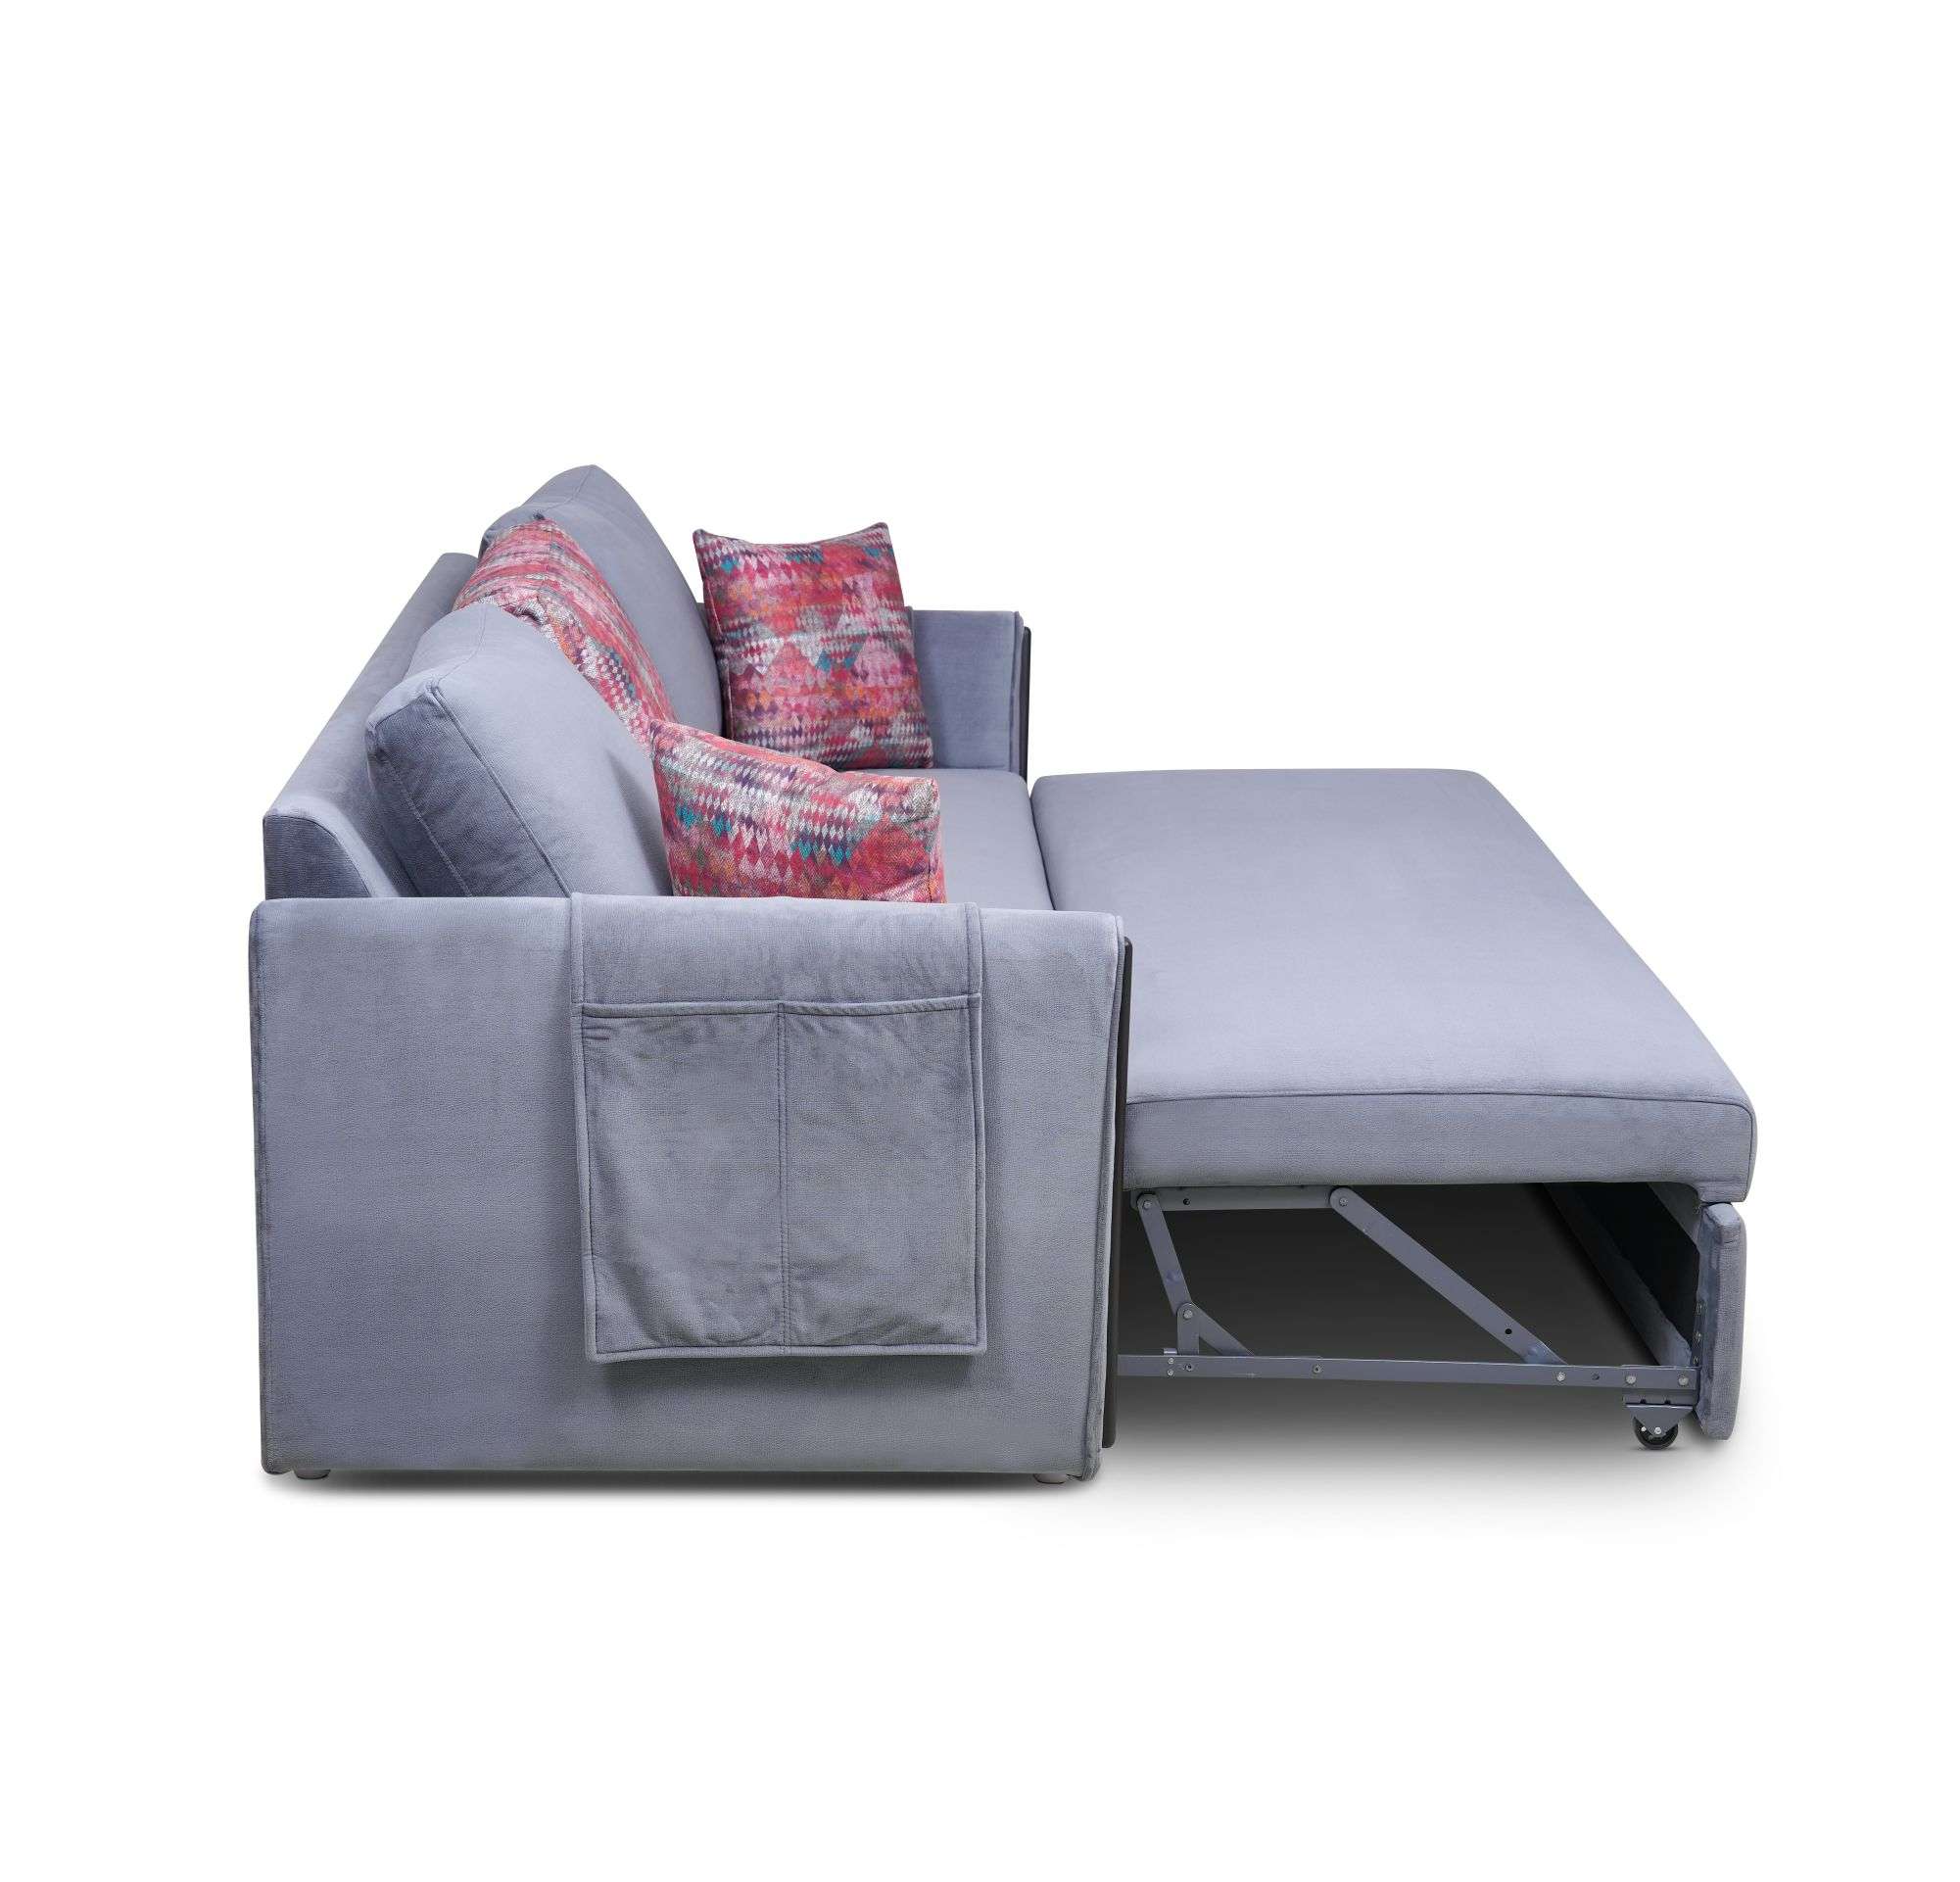 LVESCBAS003-Asterix Three seater sofa bed with Two Pillows-Grey